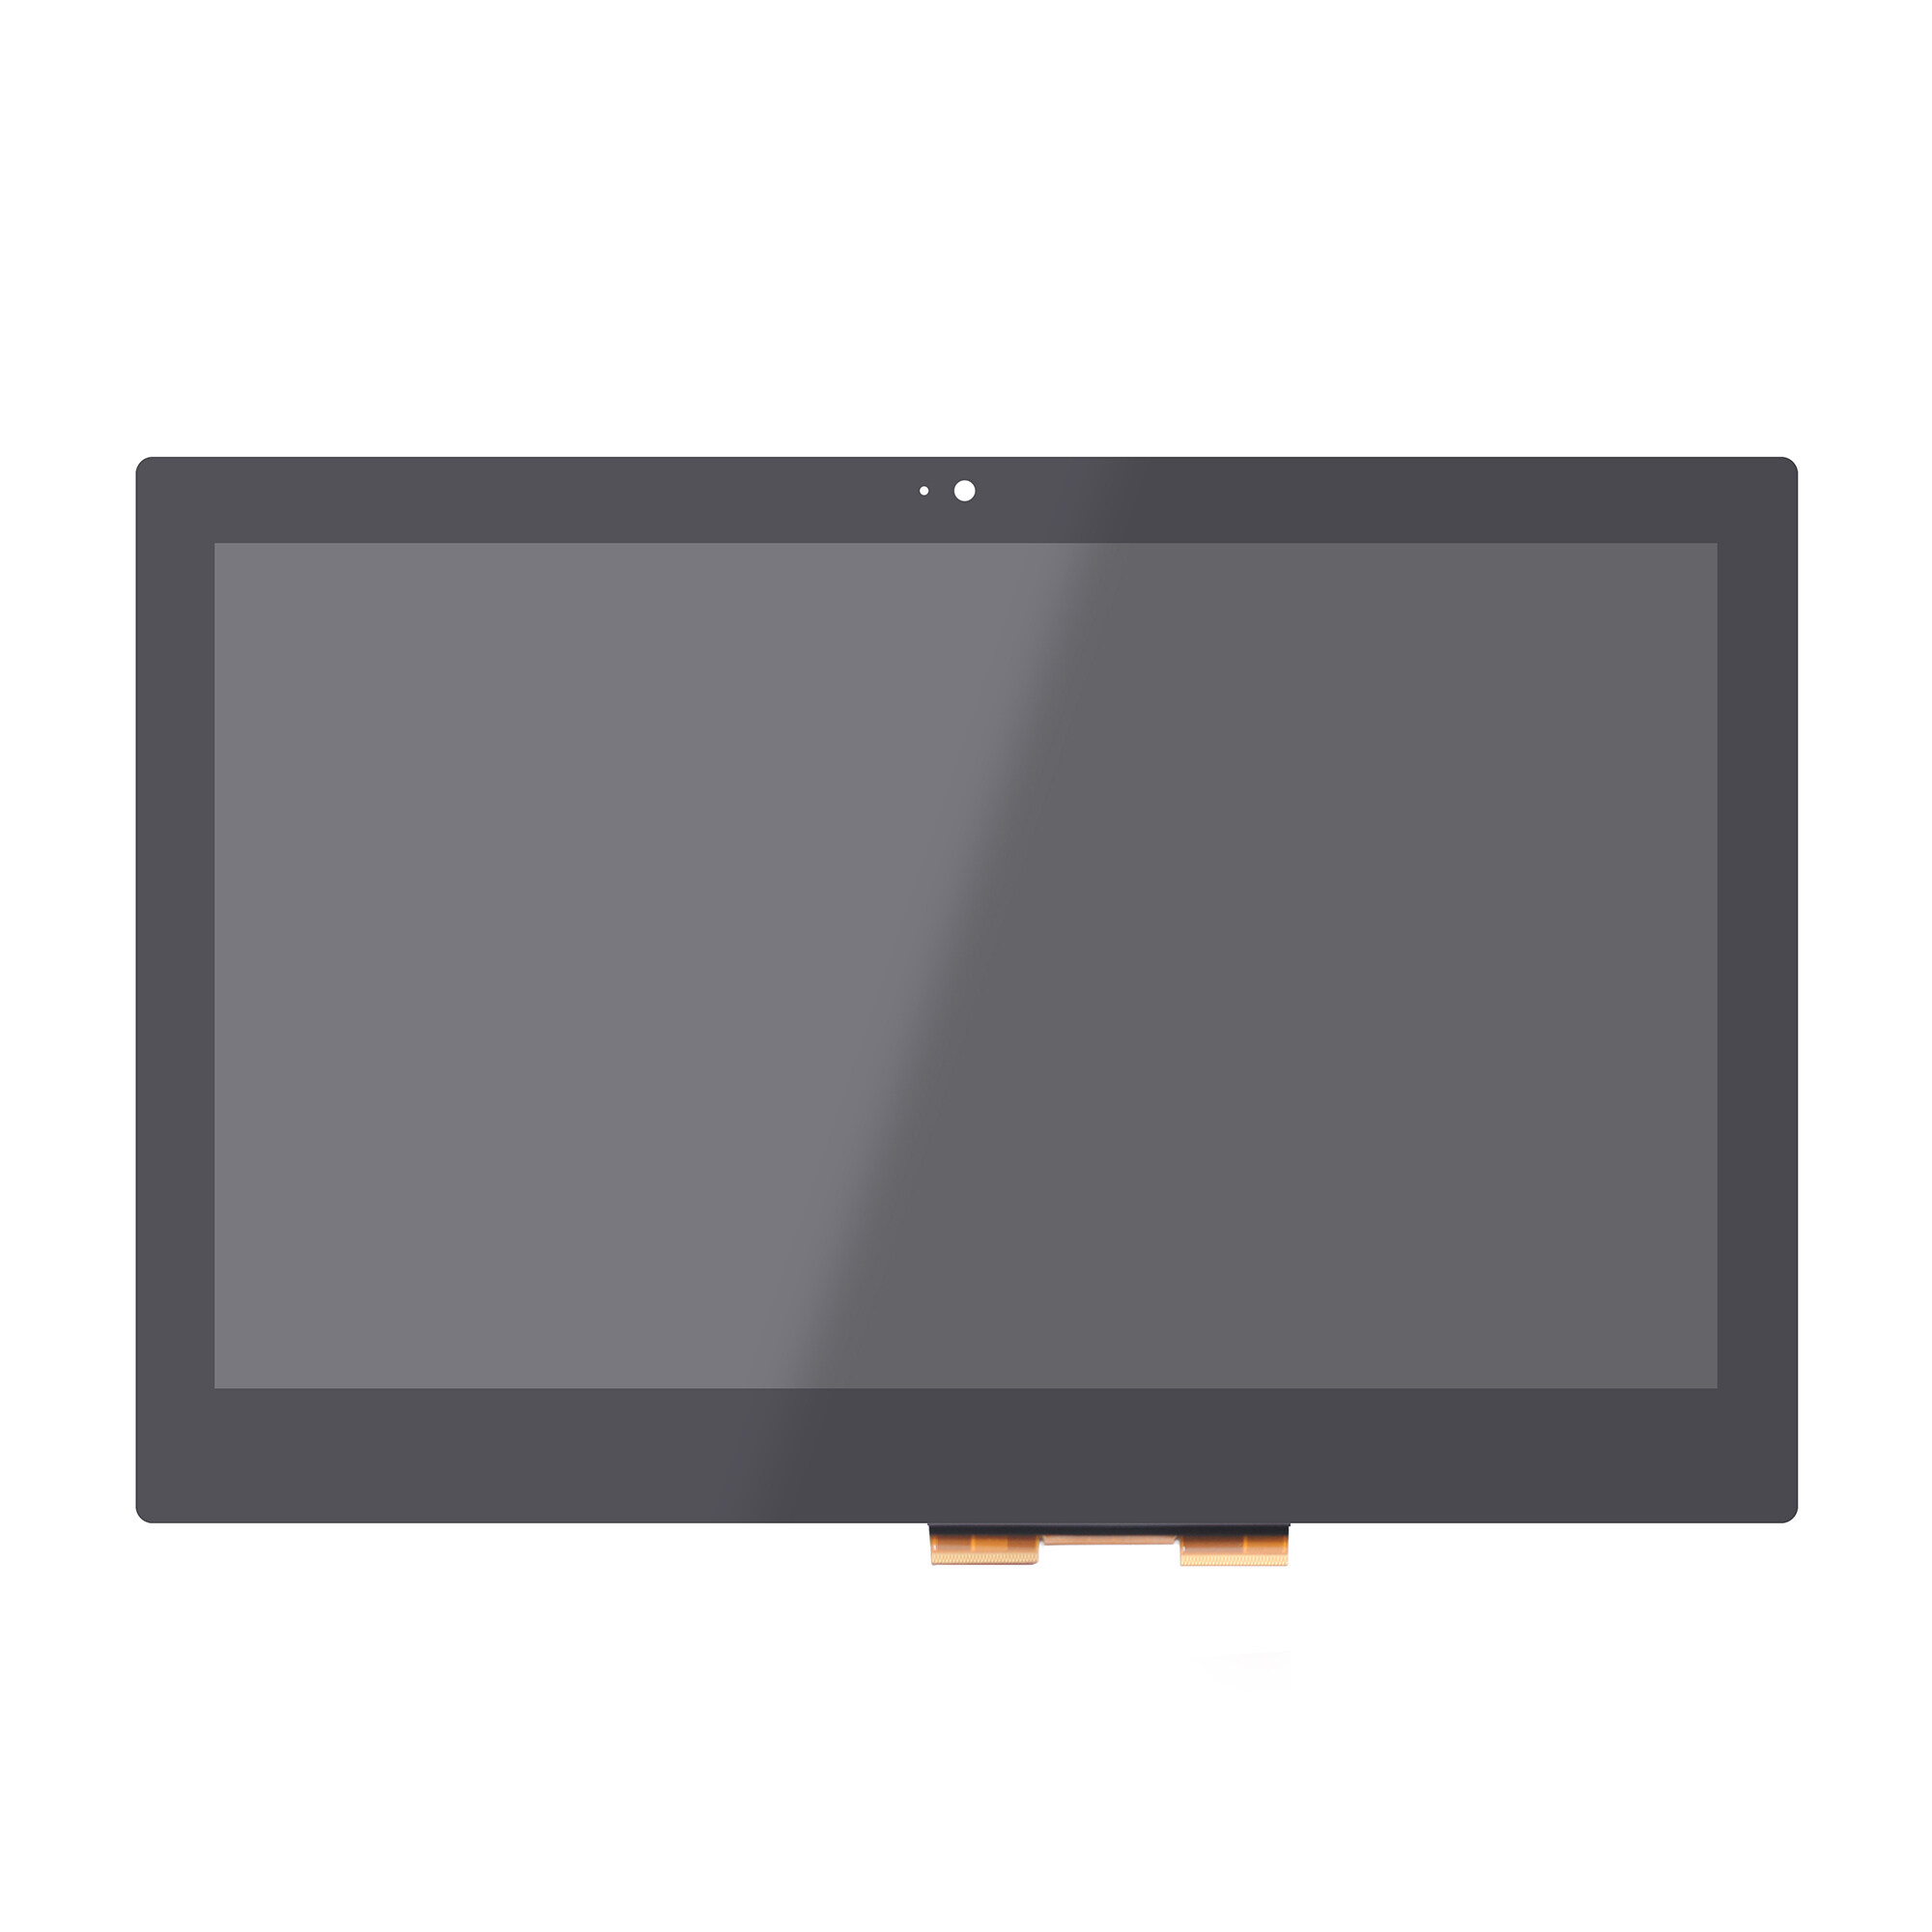 11.6" HD LED LCD Touchscreen Digitizer Assembly for Acer Chromebook R11 CB5-132T-C4LB CB5-132T-C1LK CB5-132T N15Q8